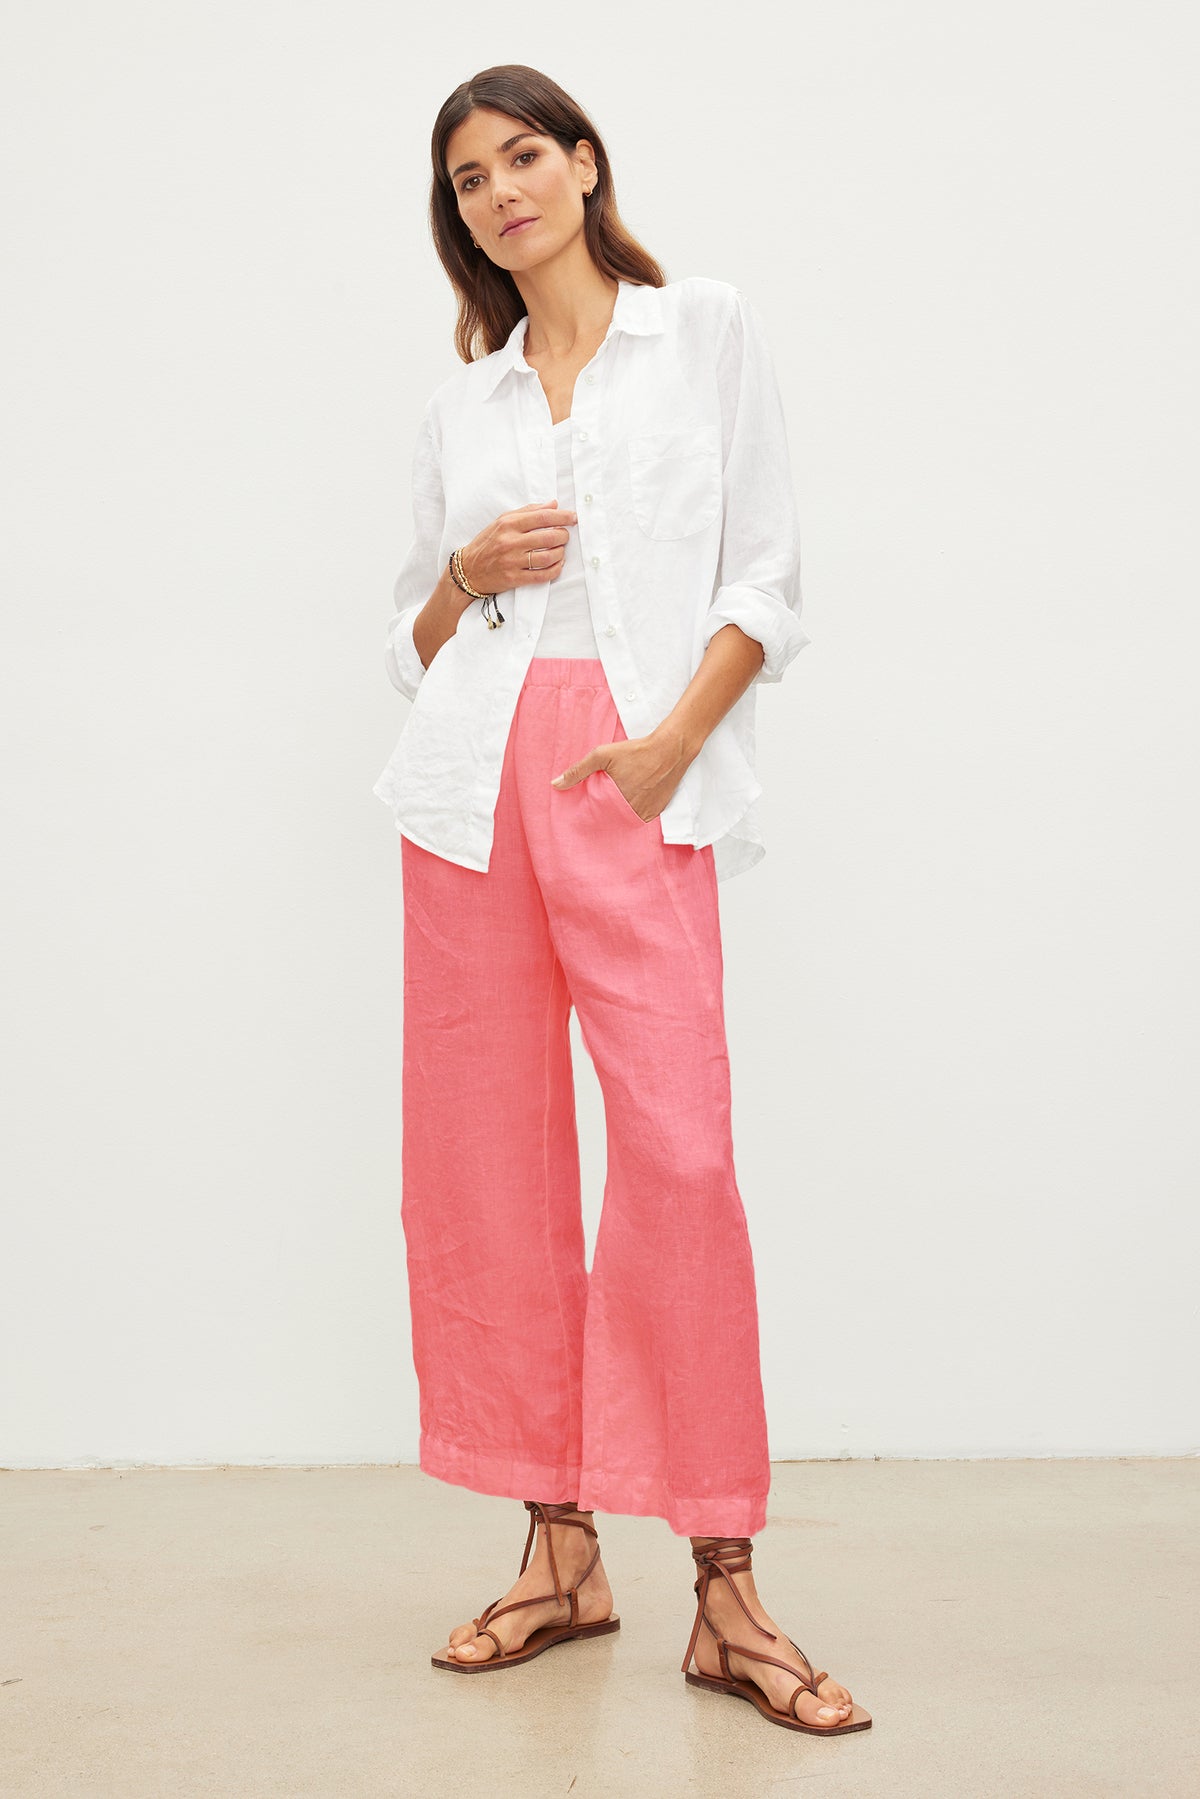   A woman stands against a plain white background, wearing a white button-up shirt and pink Velvet by Graham & Spencer LOLA LINEN PANT with an elastic waist. She has brown hair and is wearing sandals. 